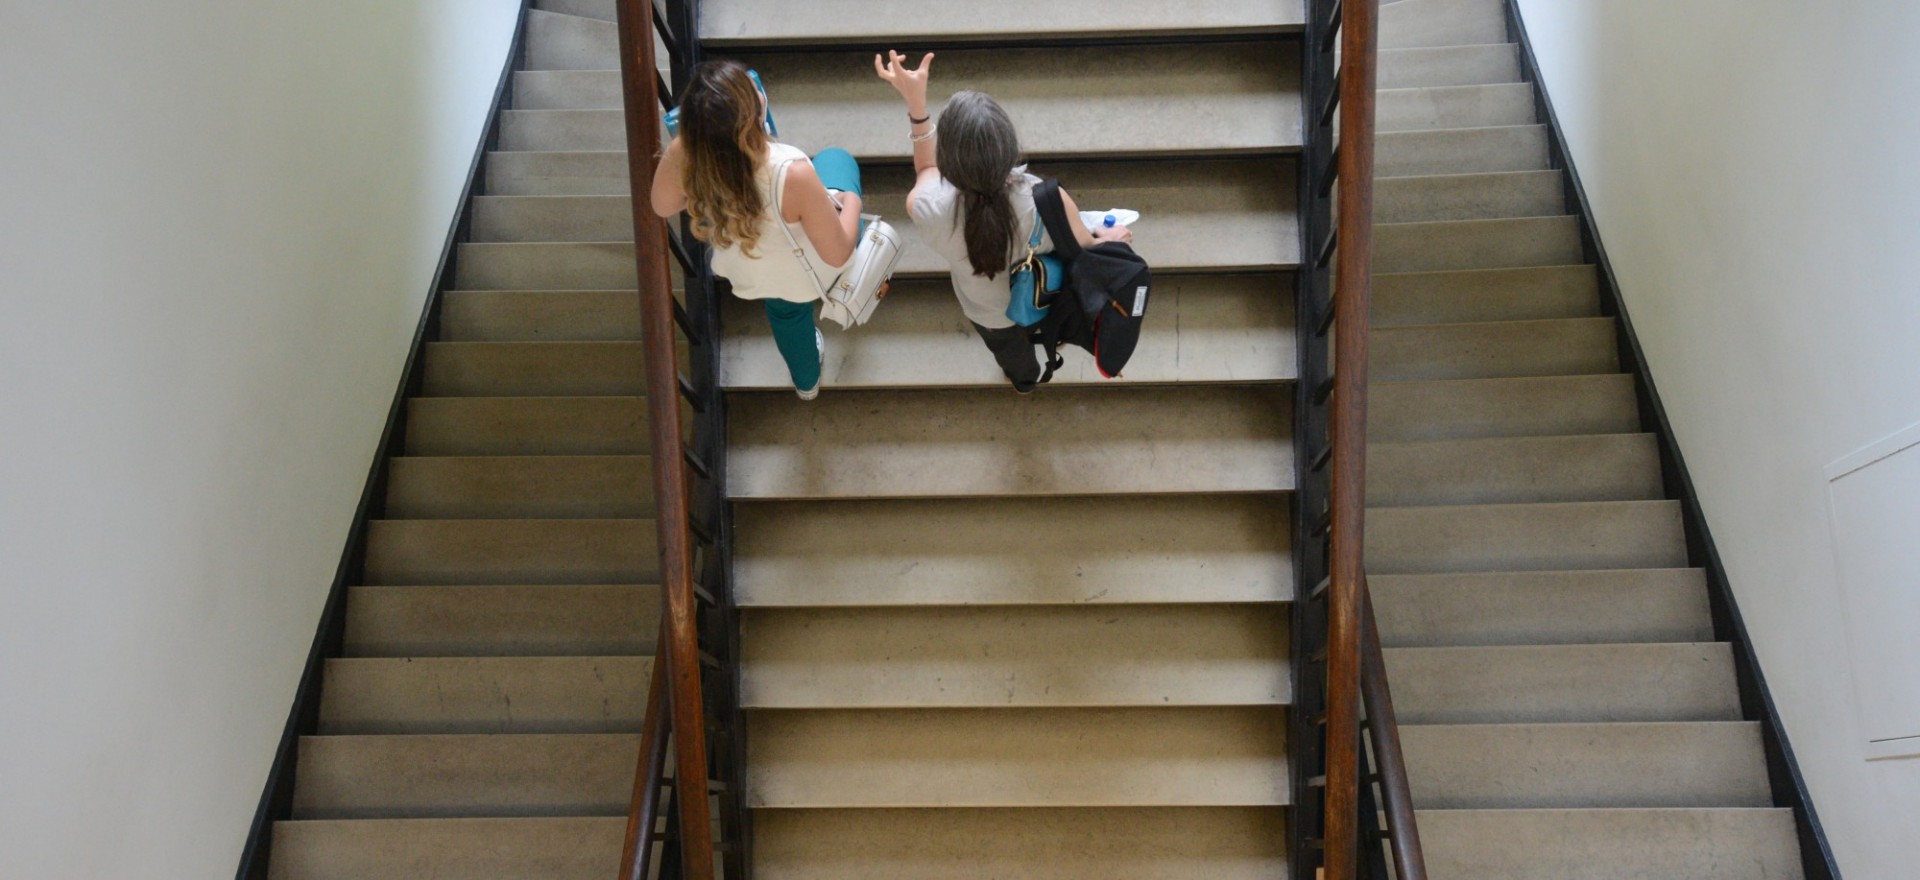 Interior photo of two women walking together up a staircase in Lewisohn Hall while talking.